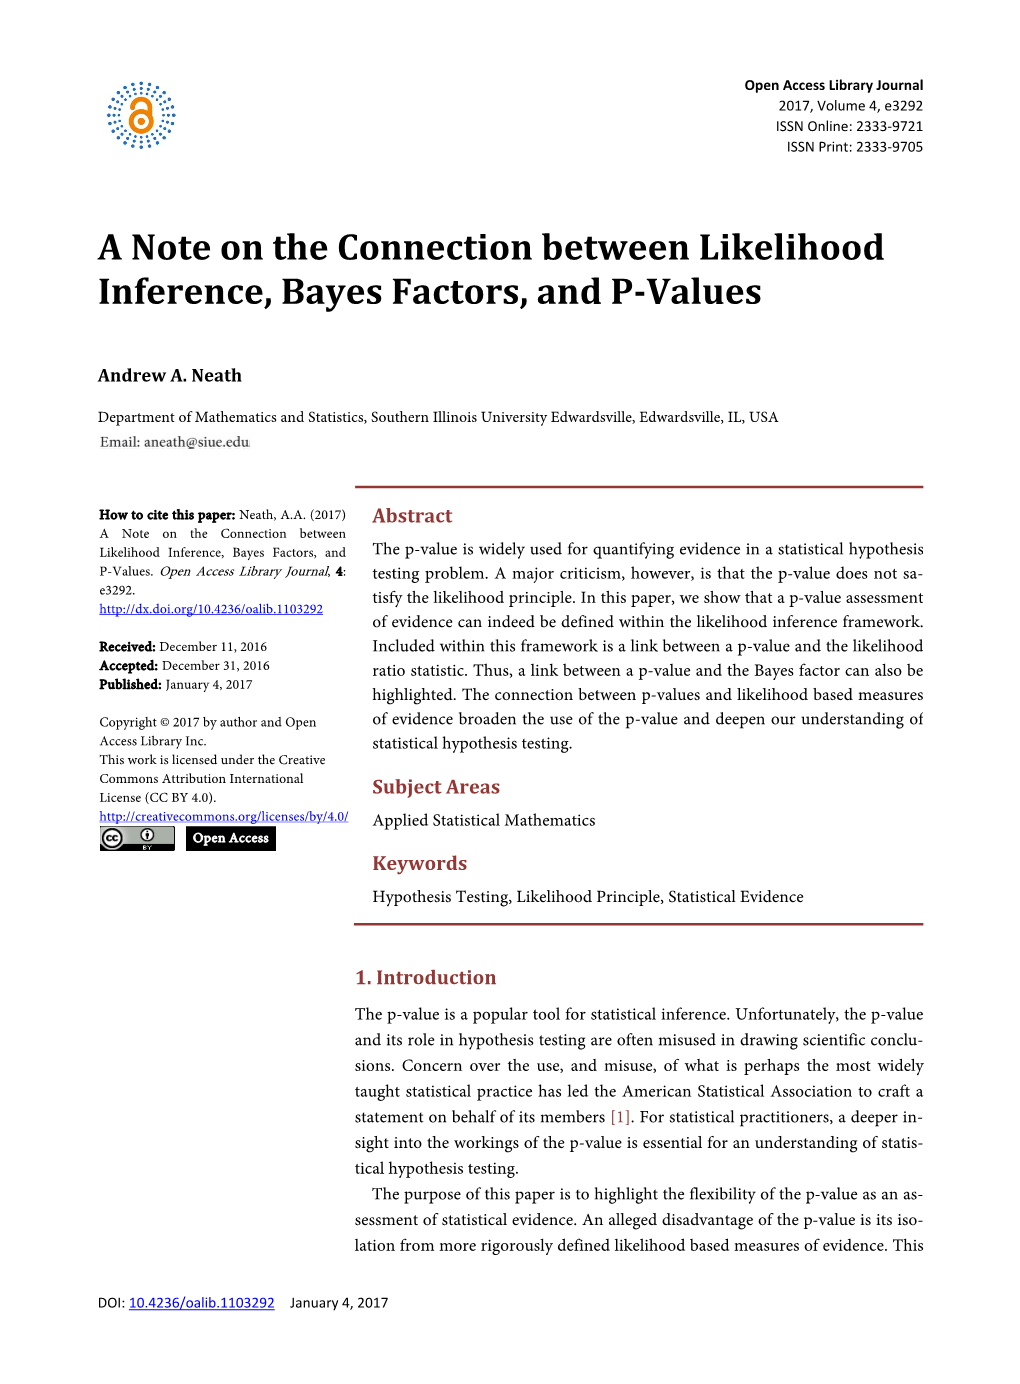 A Note on the Connection Between Likelihood Inference, Bayes Factors, and P-Values